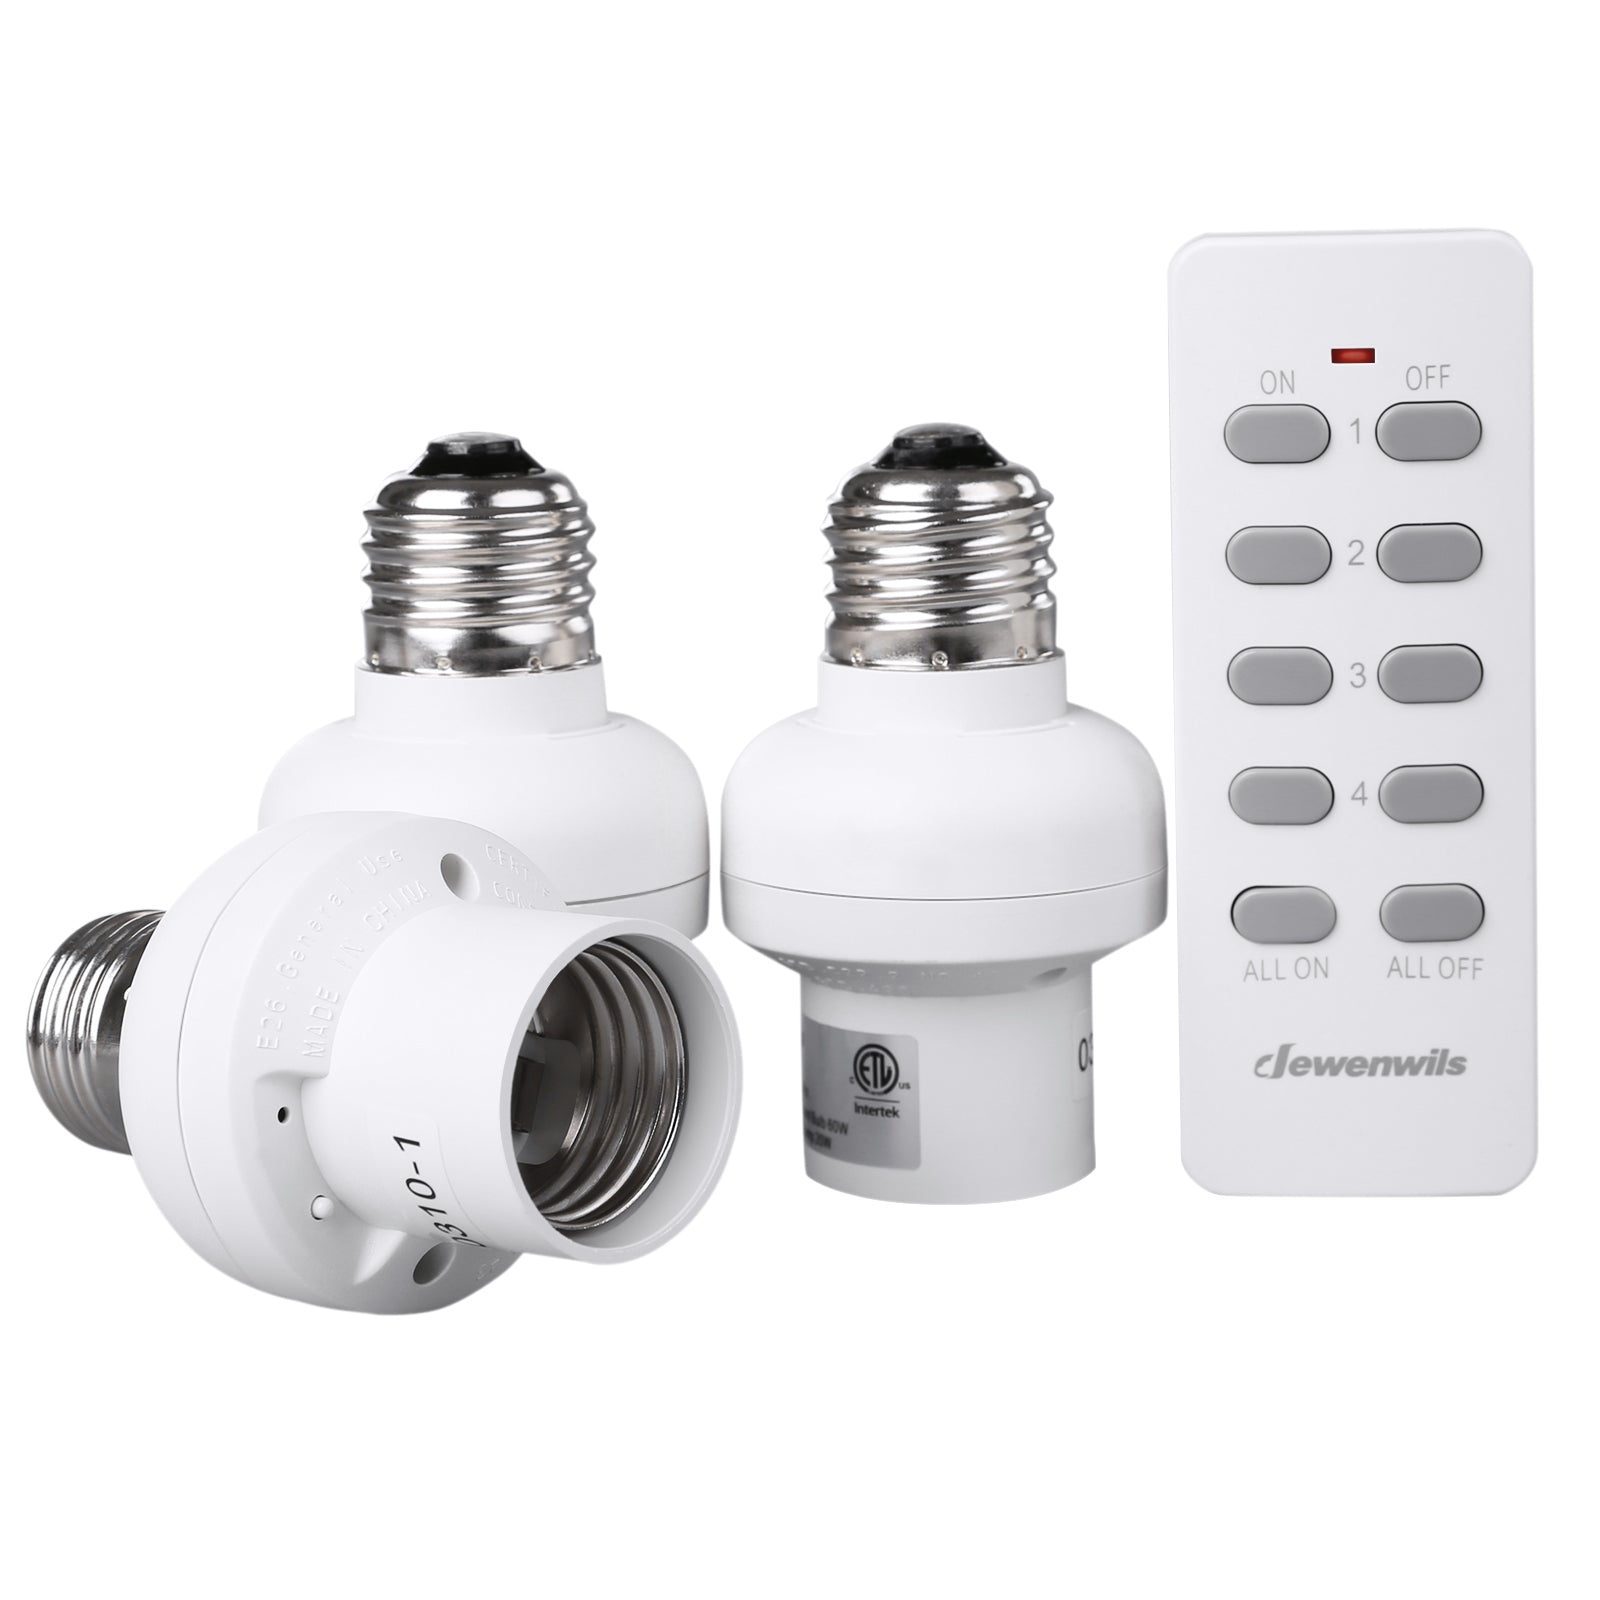 DEWENWILS Remote Control Light Bulb Socket, Wireless Light Socket Switch  Kit, Remote Light Socket E26/E27 Base for Pull Chain Light Fixture –  Dewenwils